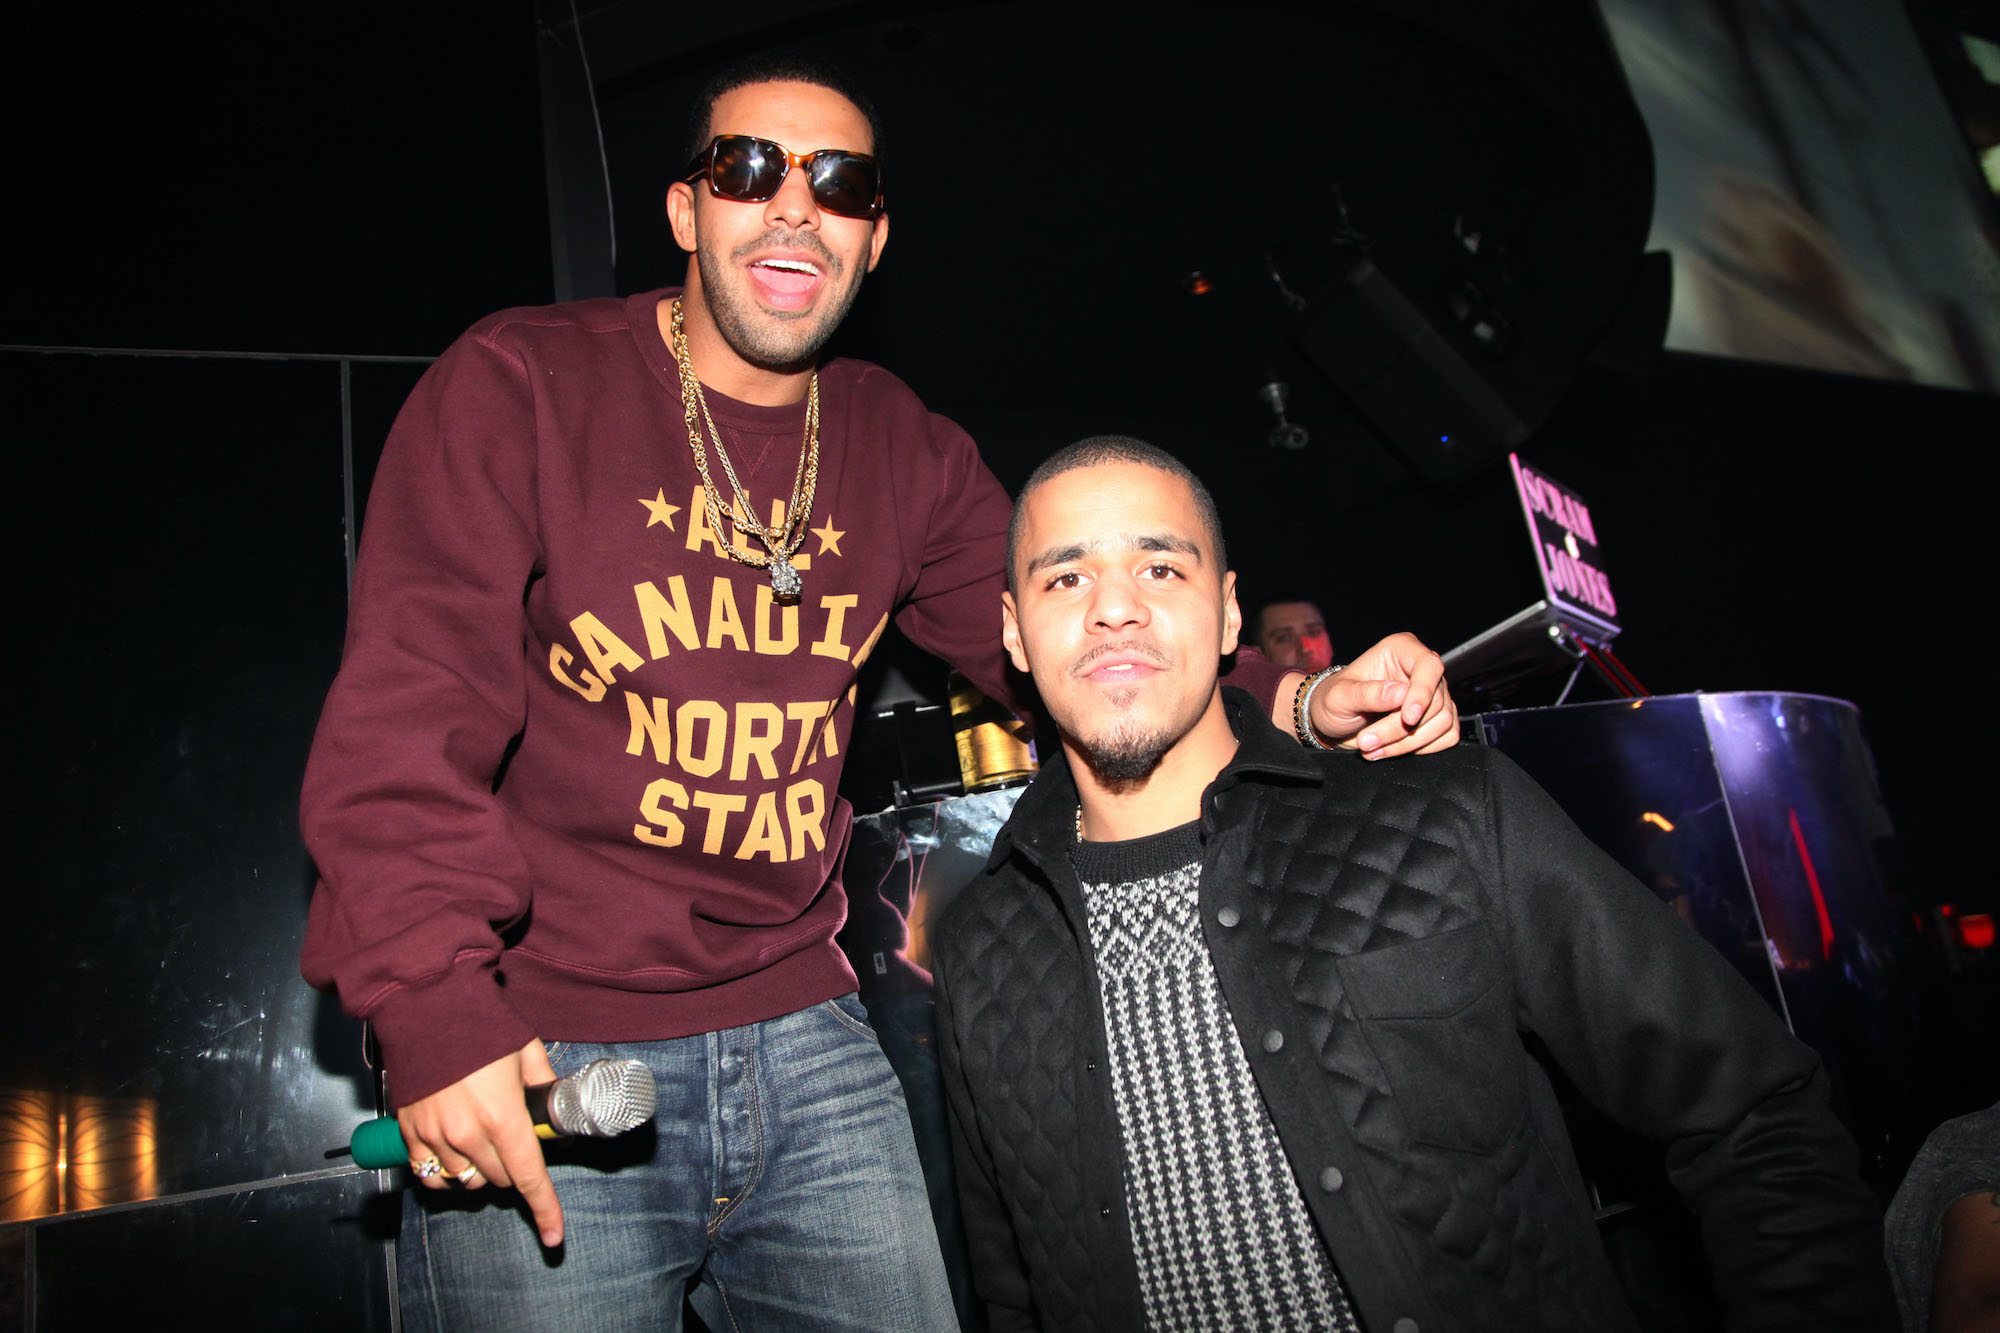 (L-R) Drake and J. Cole in front of a dark background